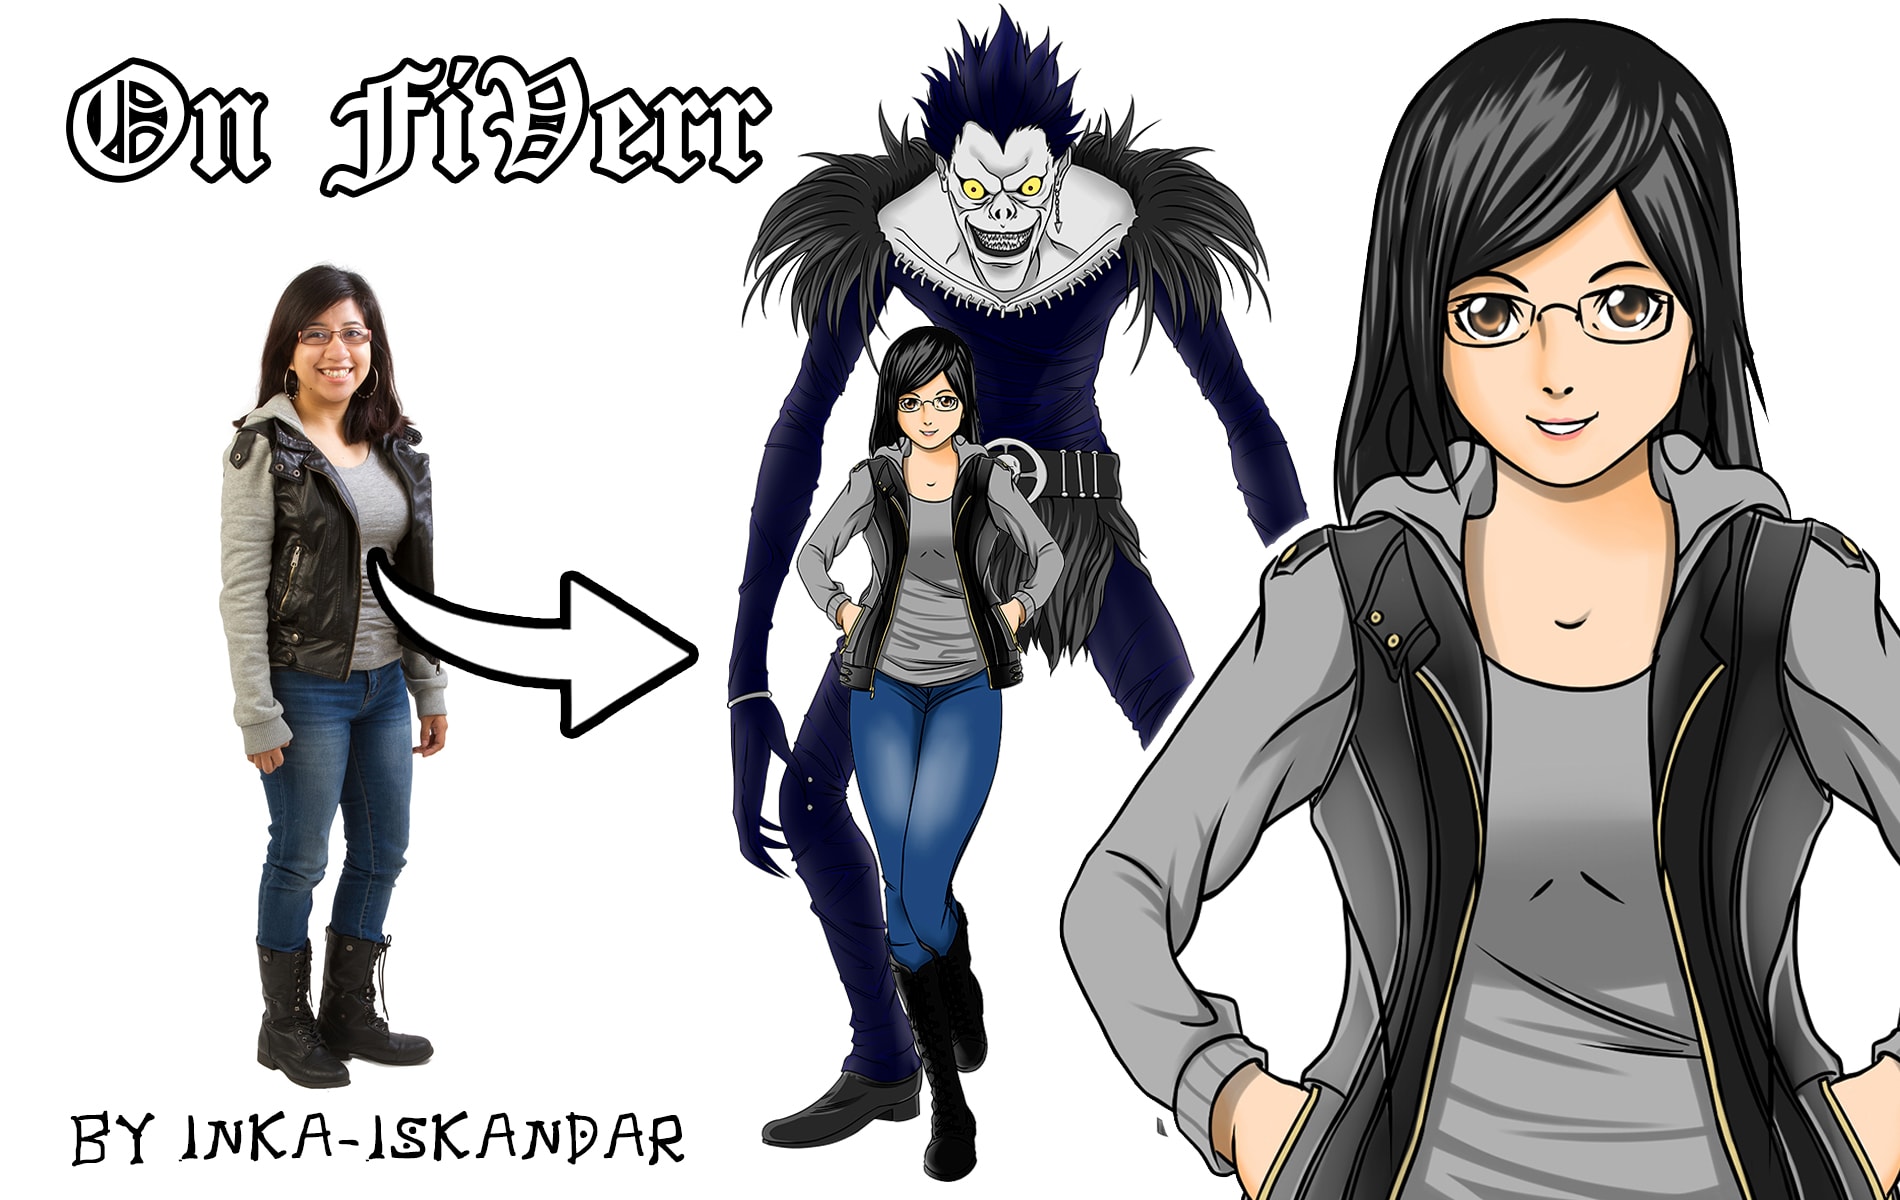 Draw you in death note manga anime style character with shinigami